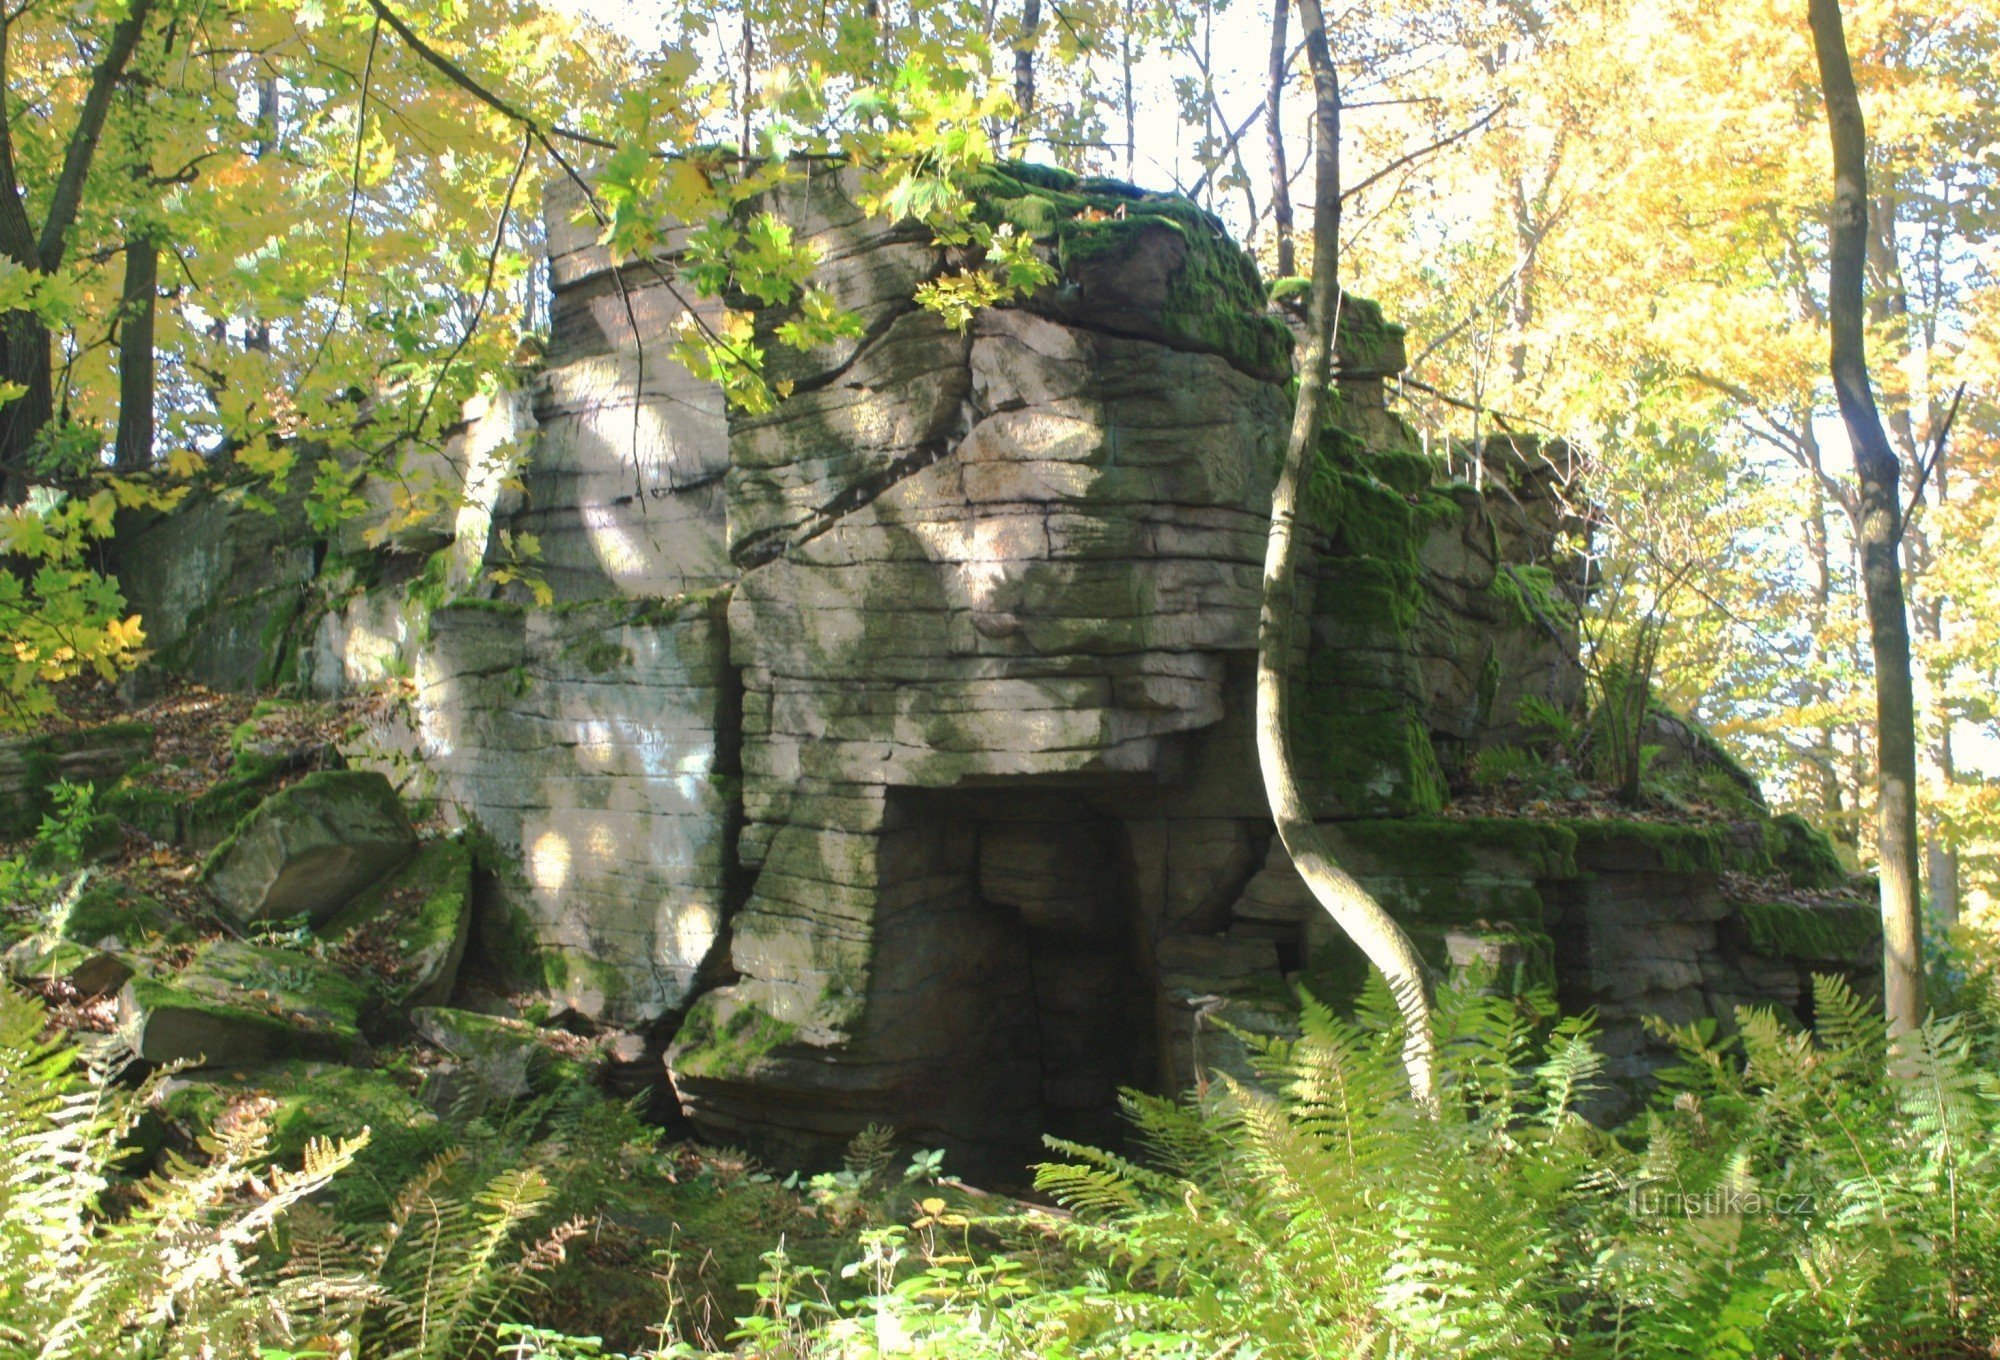 Sýkoř - frost cabin in the top part